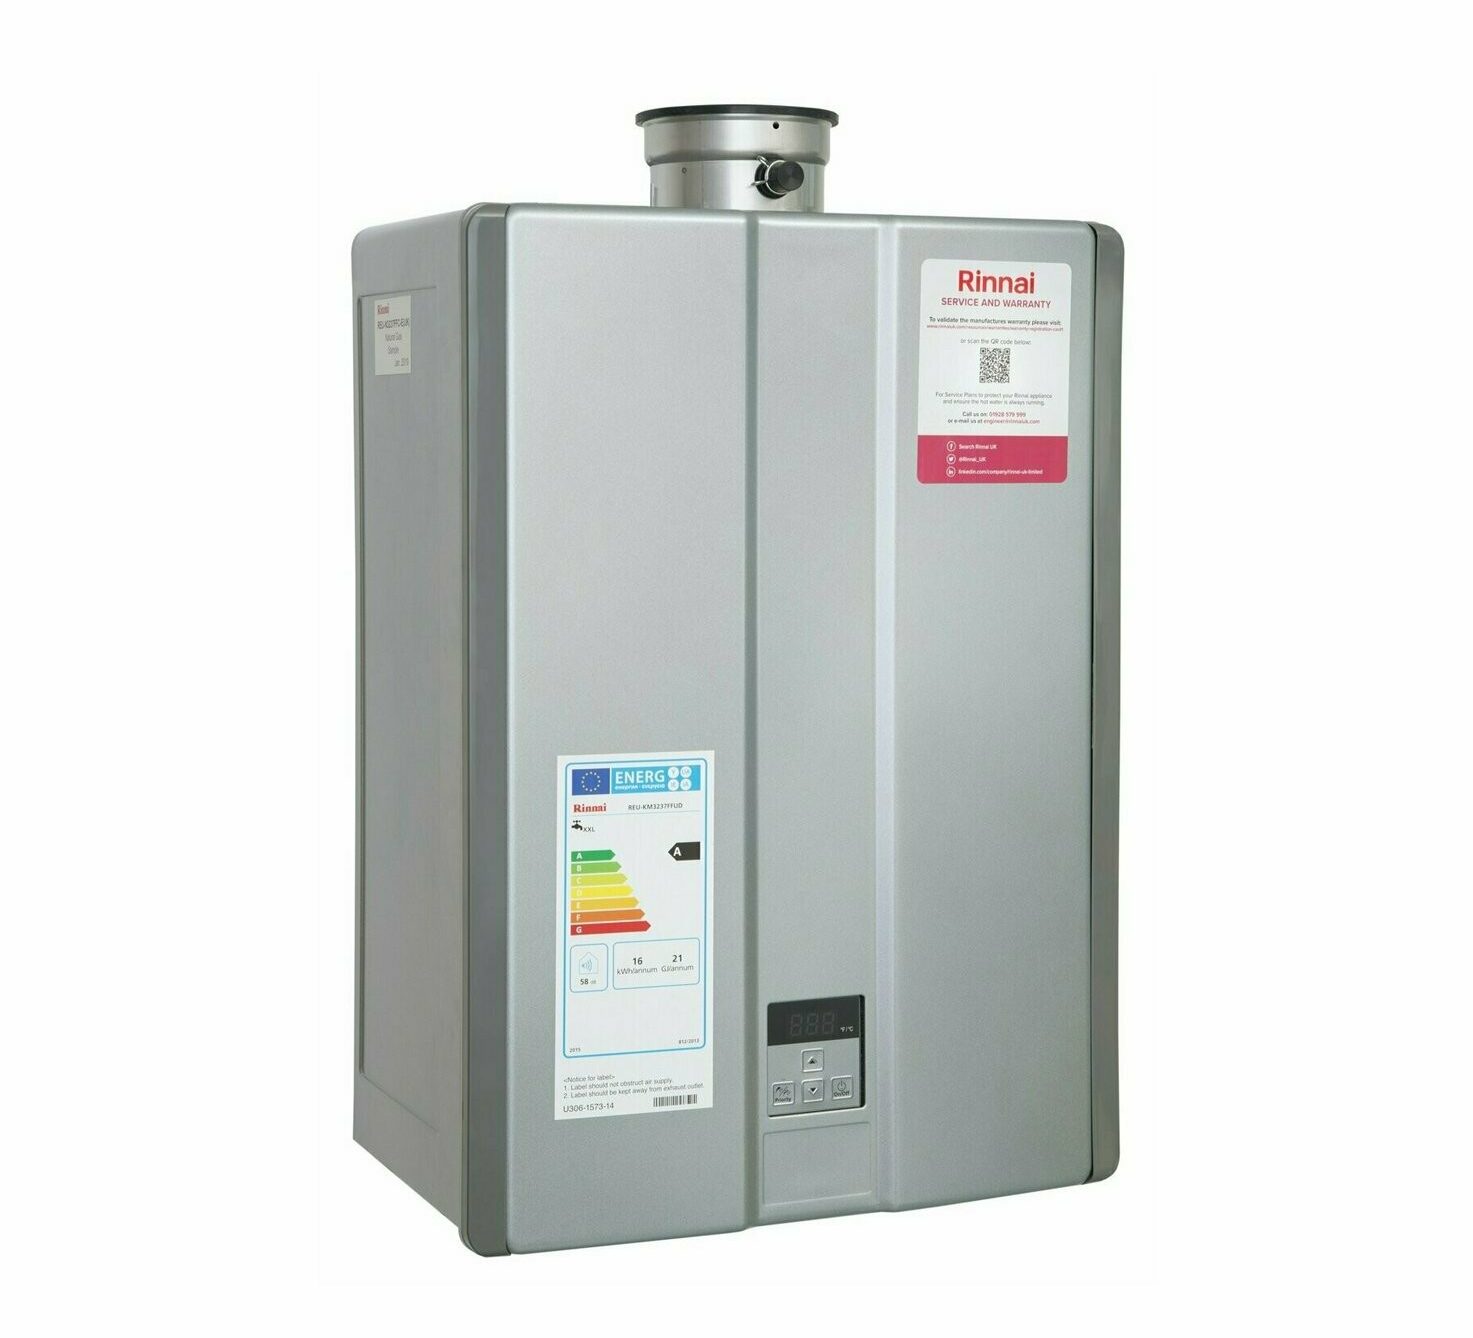 condensing water heater e1616265941759 Water Heaters- Which Type Is the Right One for Your Home? - 6